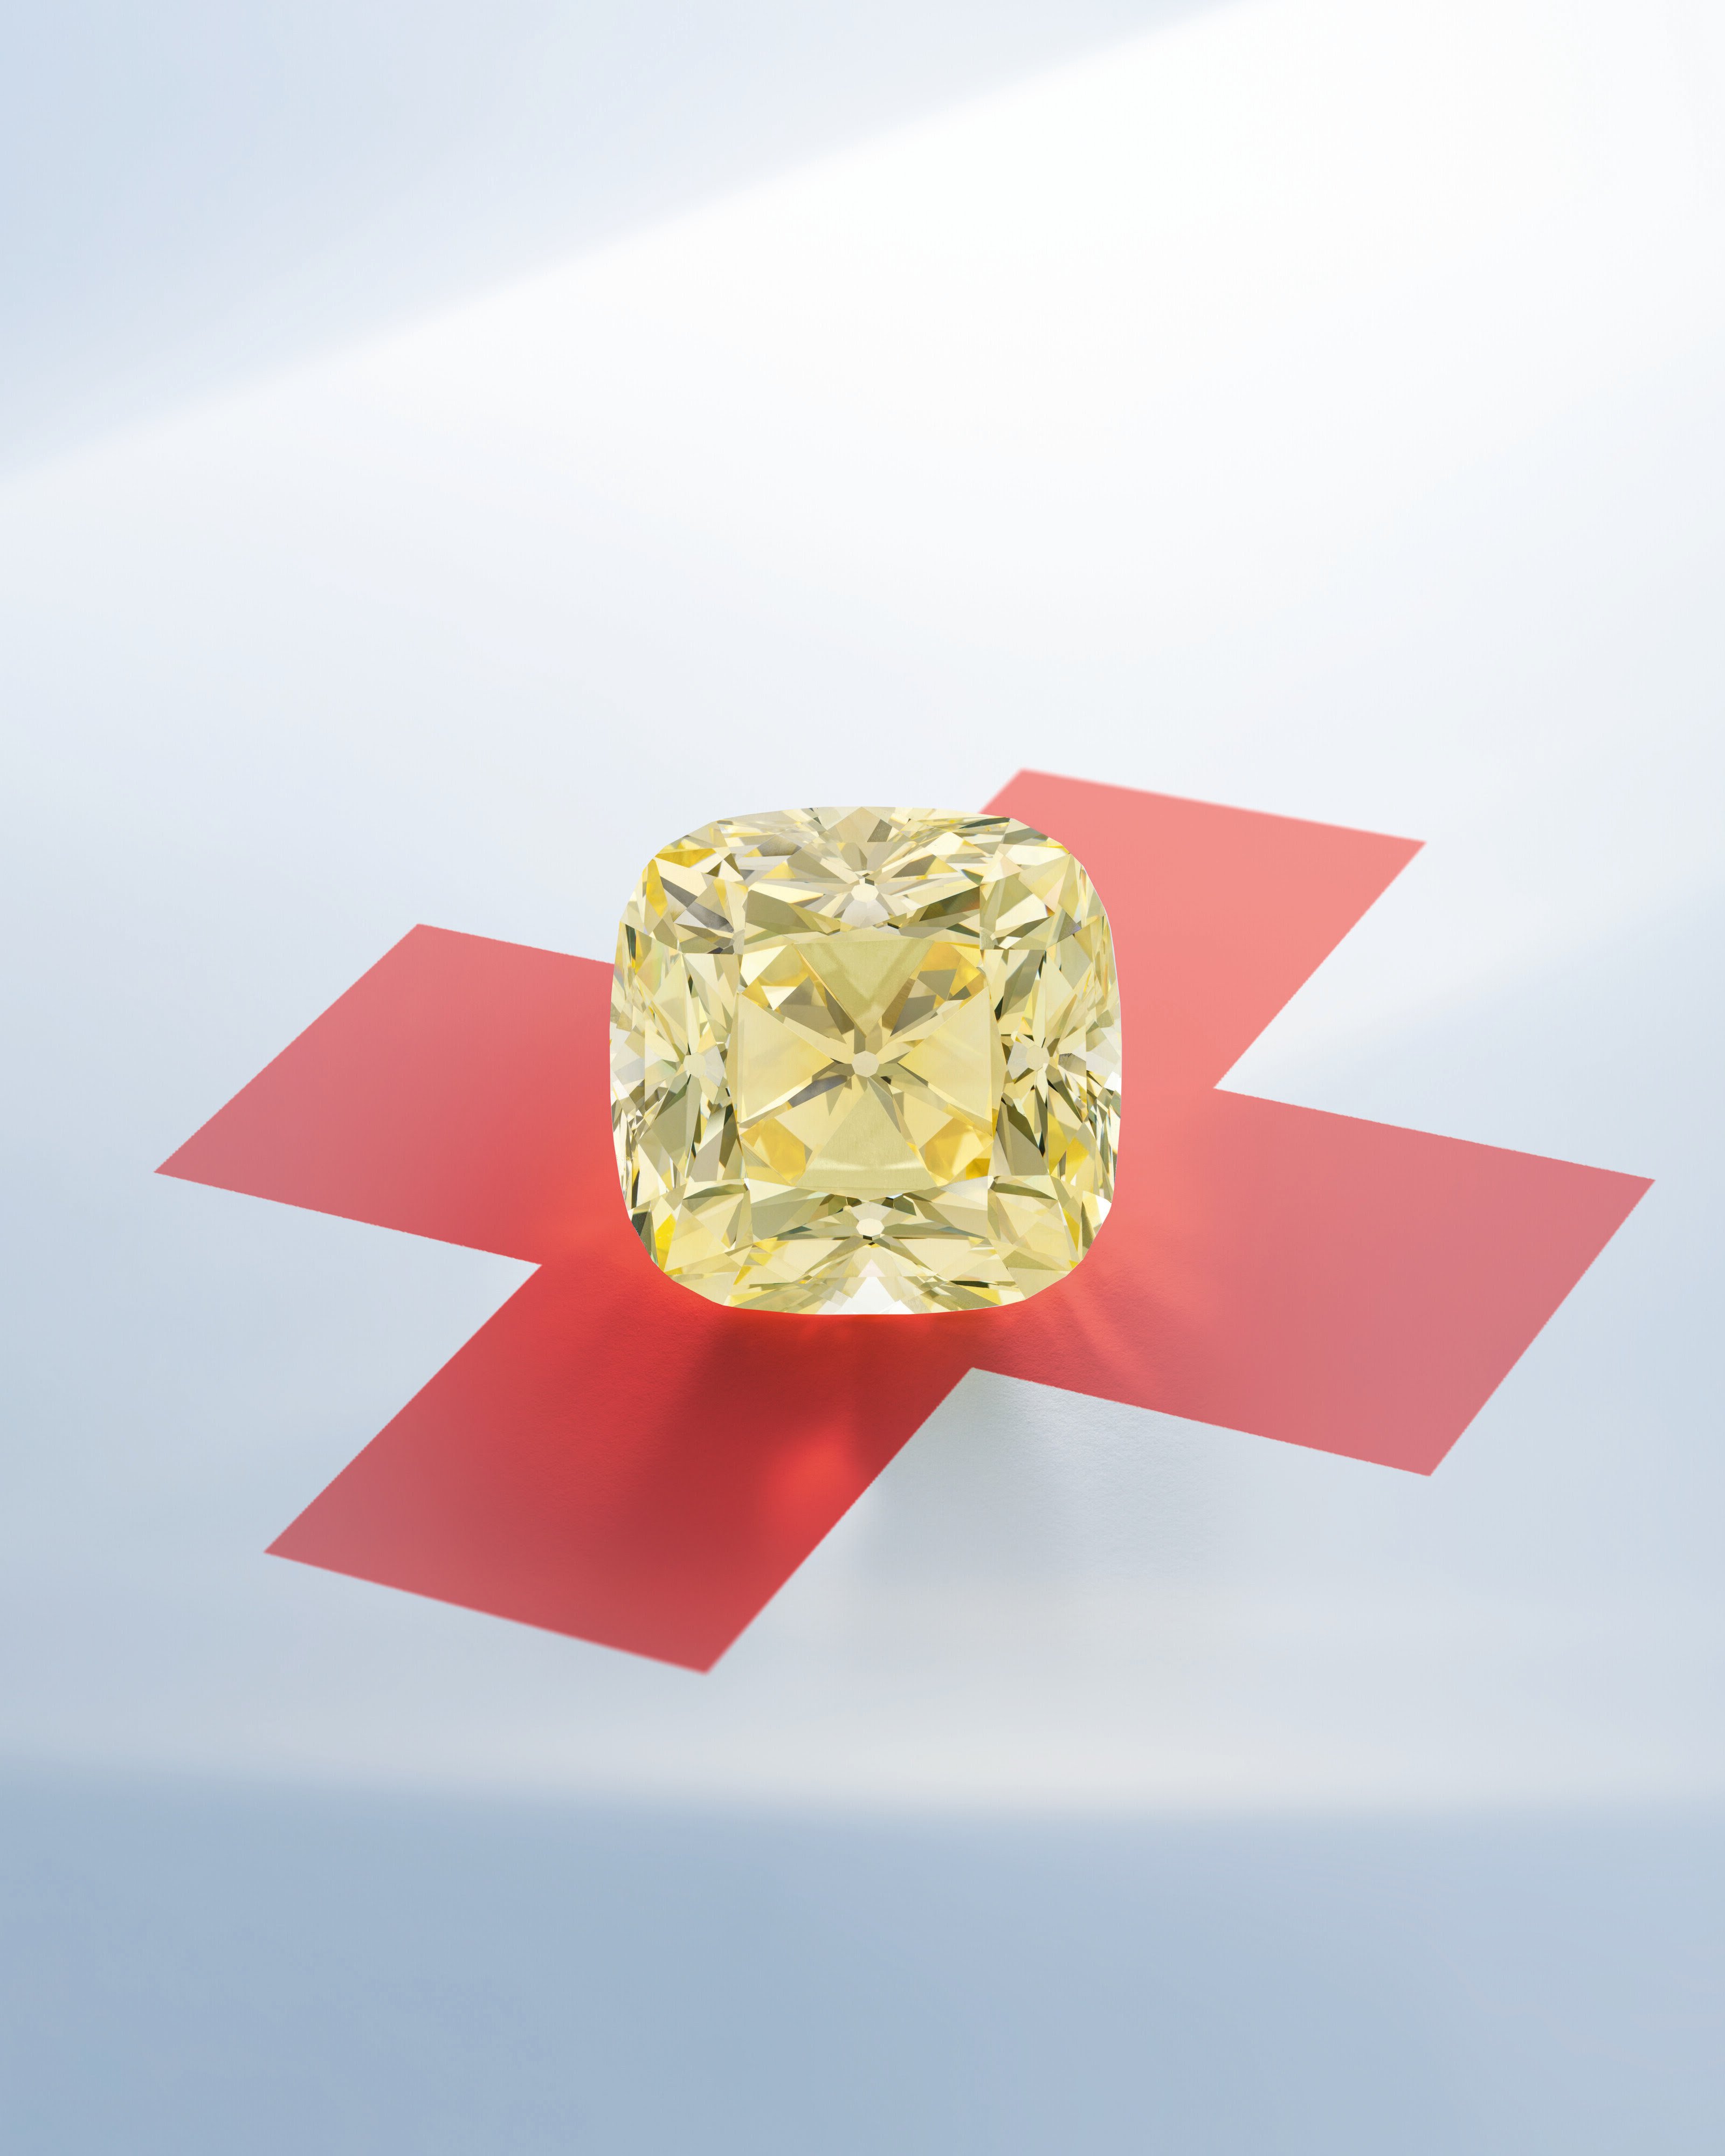 timeren chokerende Anger For the Third Time in Its History, Christie's Will Sell One of the World's  Largest Diamonds to Benefit the Red Cross